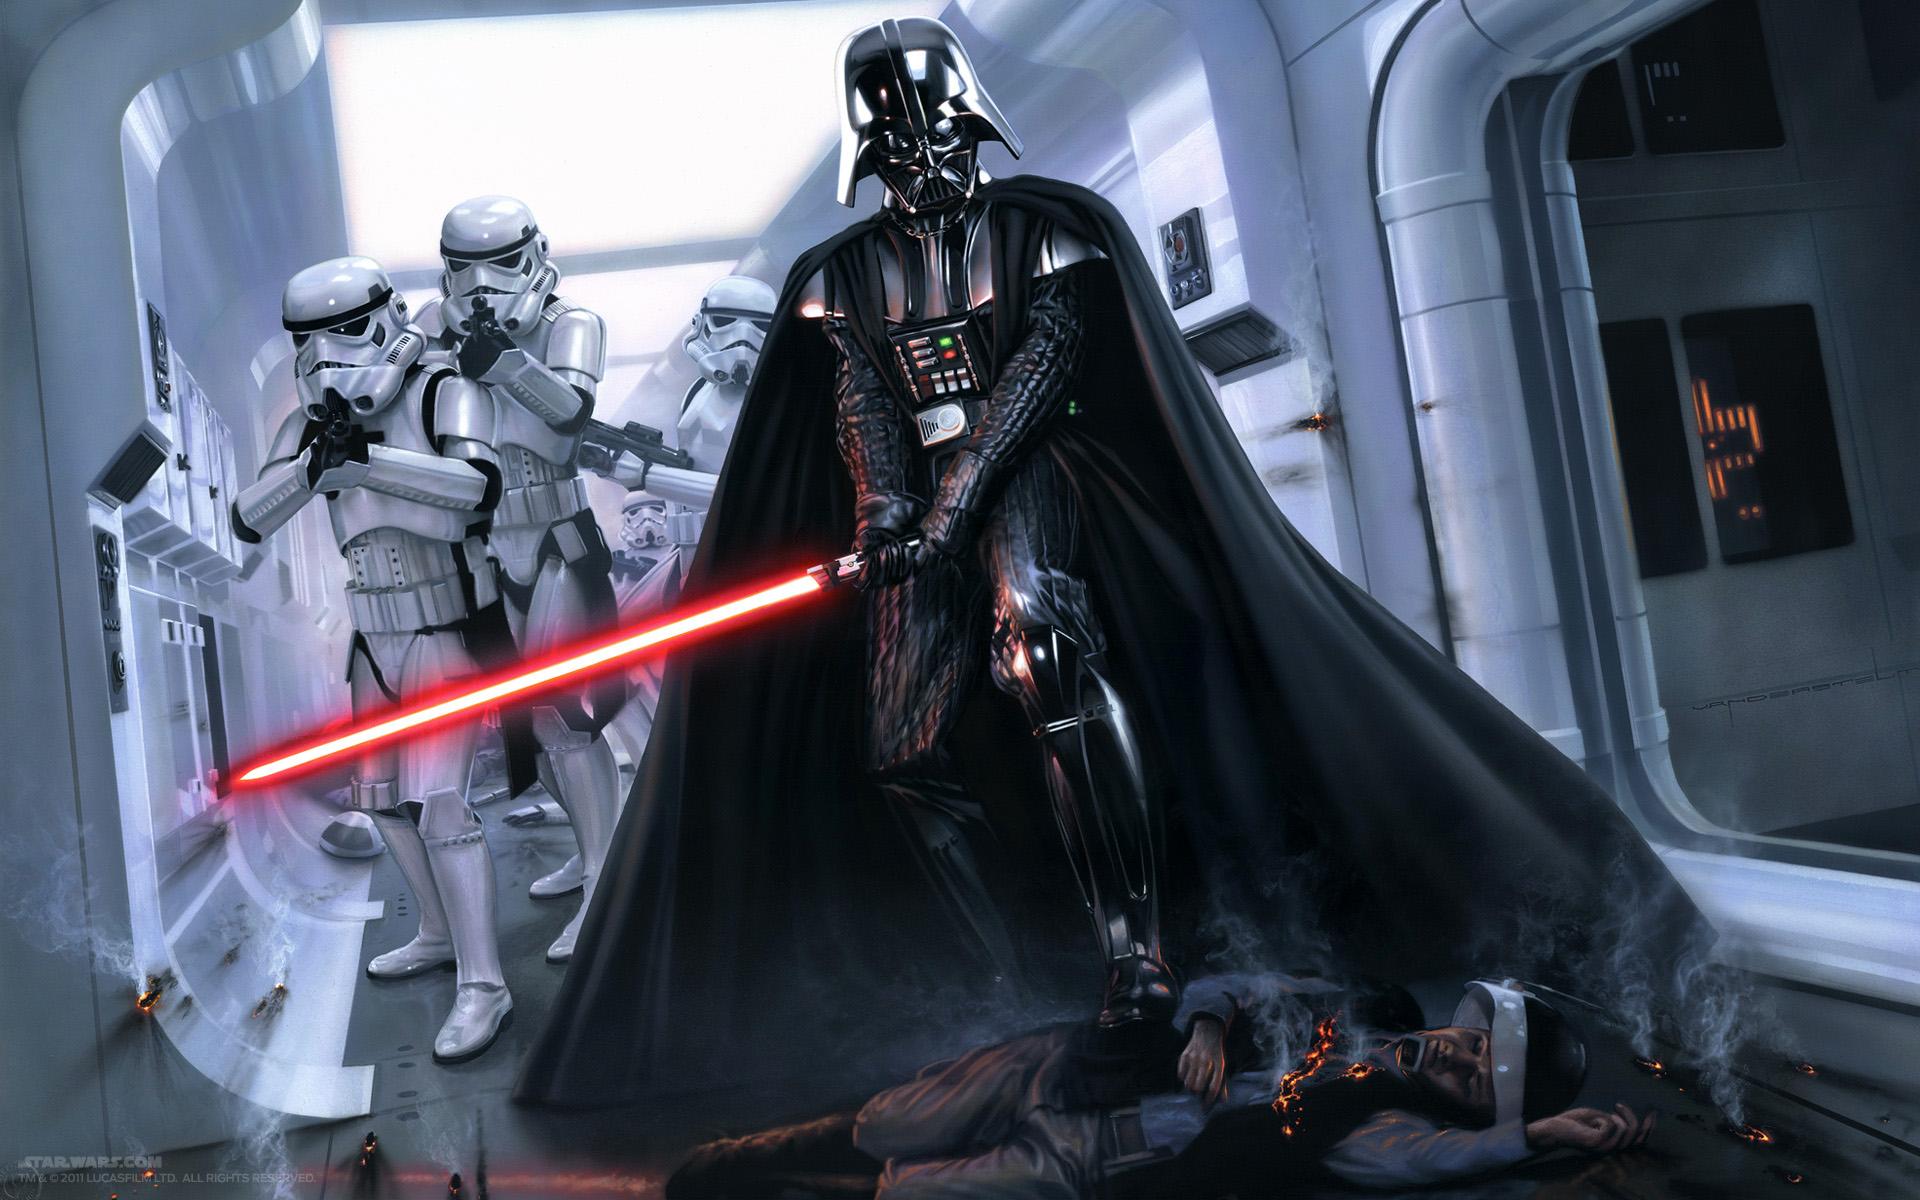 Darth Vader is running for office in the Ukraine. Watch his epic